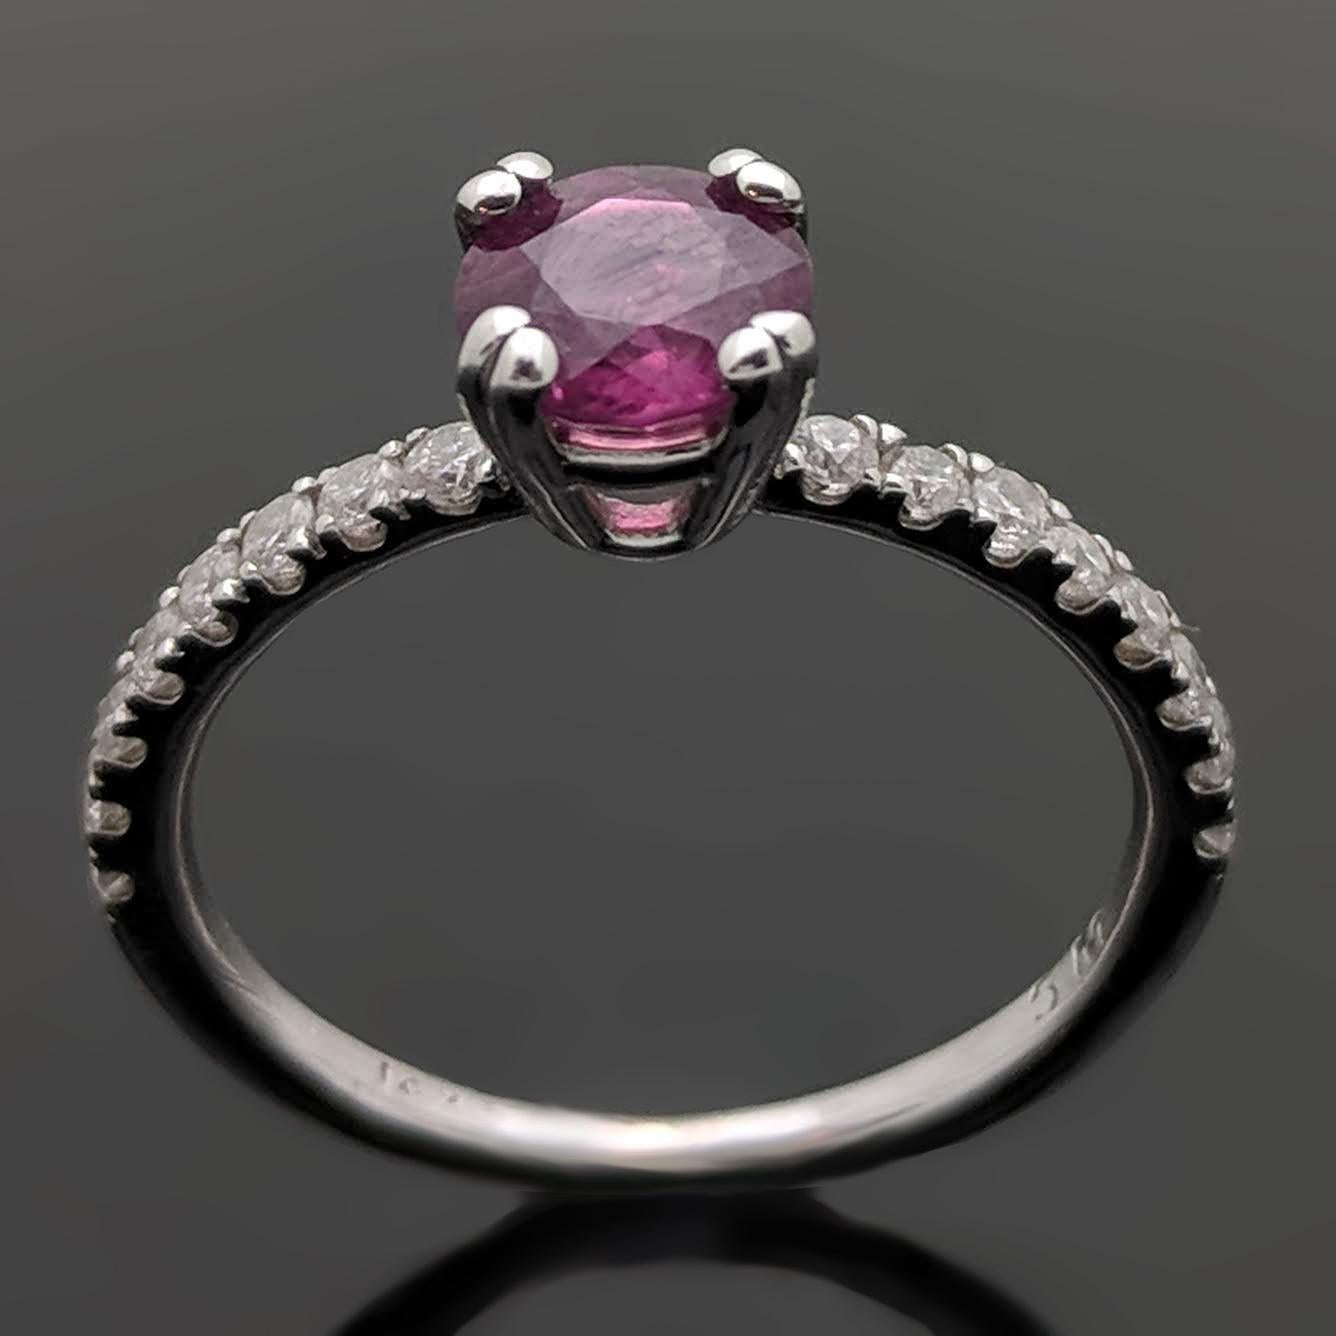 14kt white gold ring featuring a gorgeous ruby estimated at 0.75ct and accent diamonds estimated at 0.11cttw down the shoulders. Estimated weight of gold is 1 gr. 

We will size it for you.

